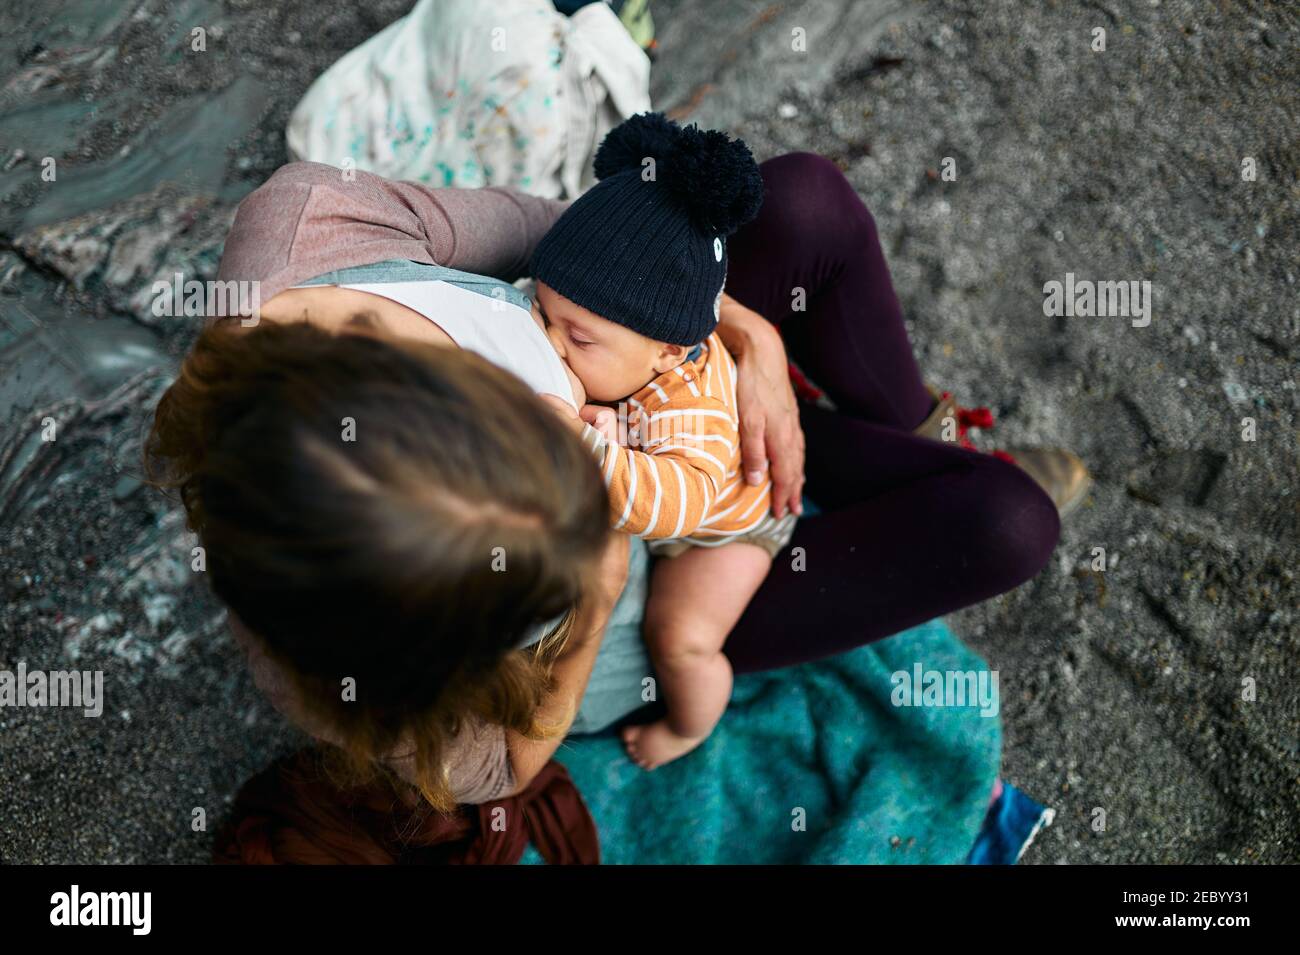 A young mother is breastfeeding her baby outdoors on the beach in autumn Stock Photo